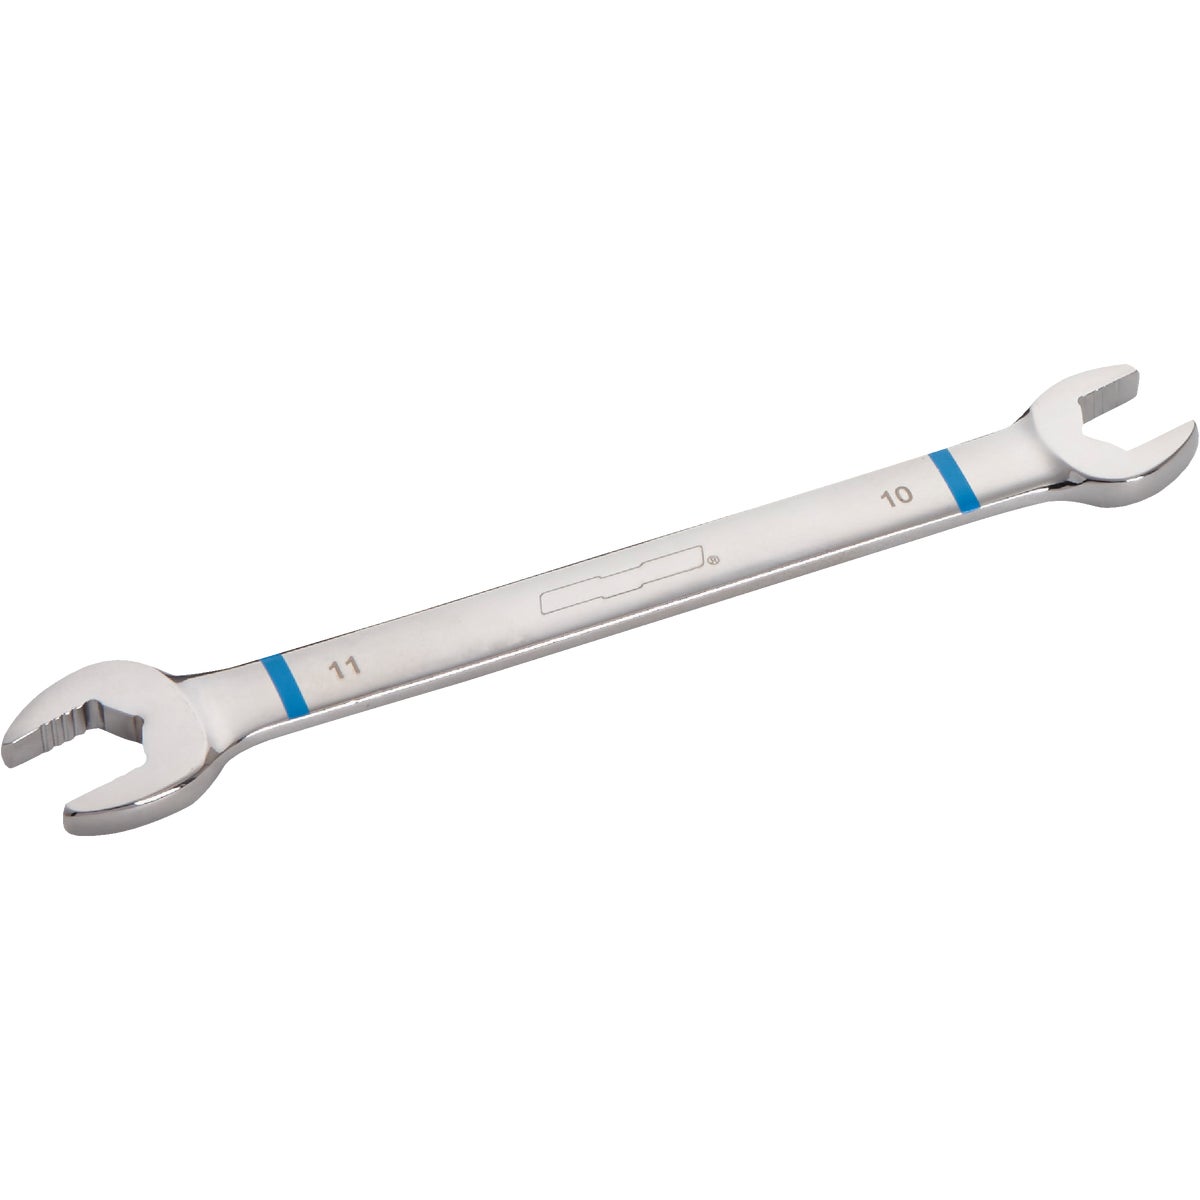 Channellock Metric 10 mm x 11 mm Open End Wrench